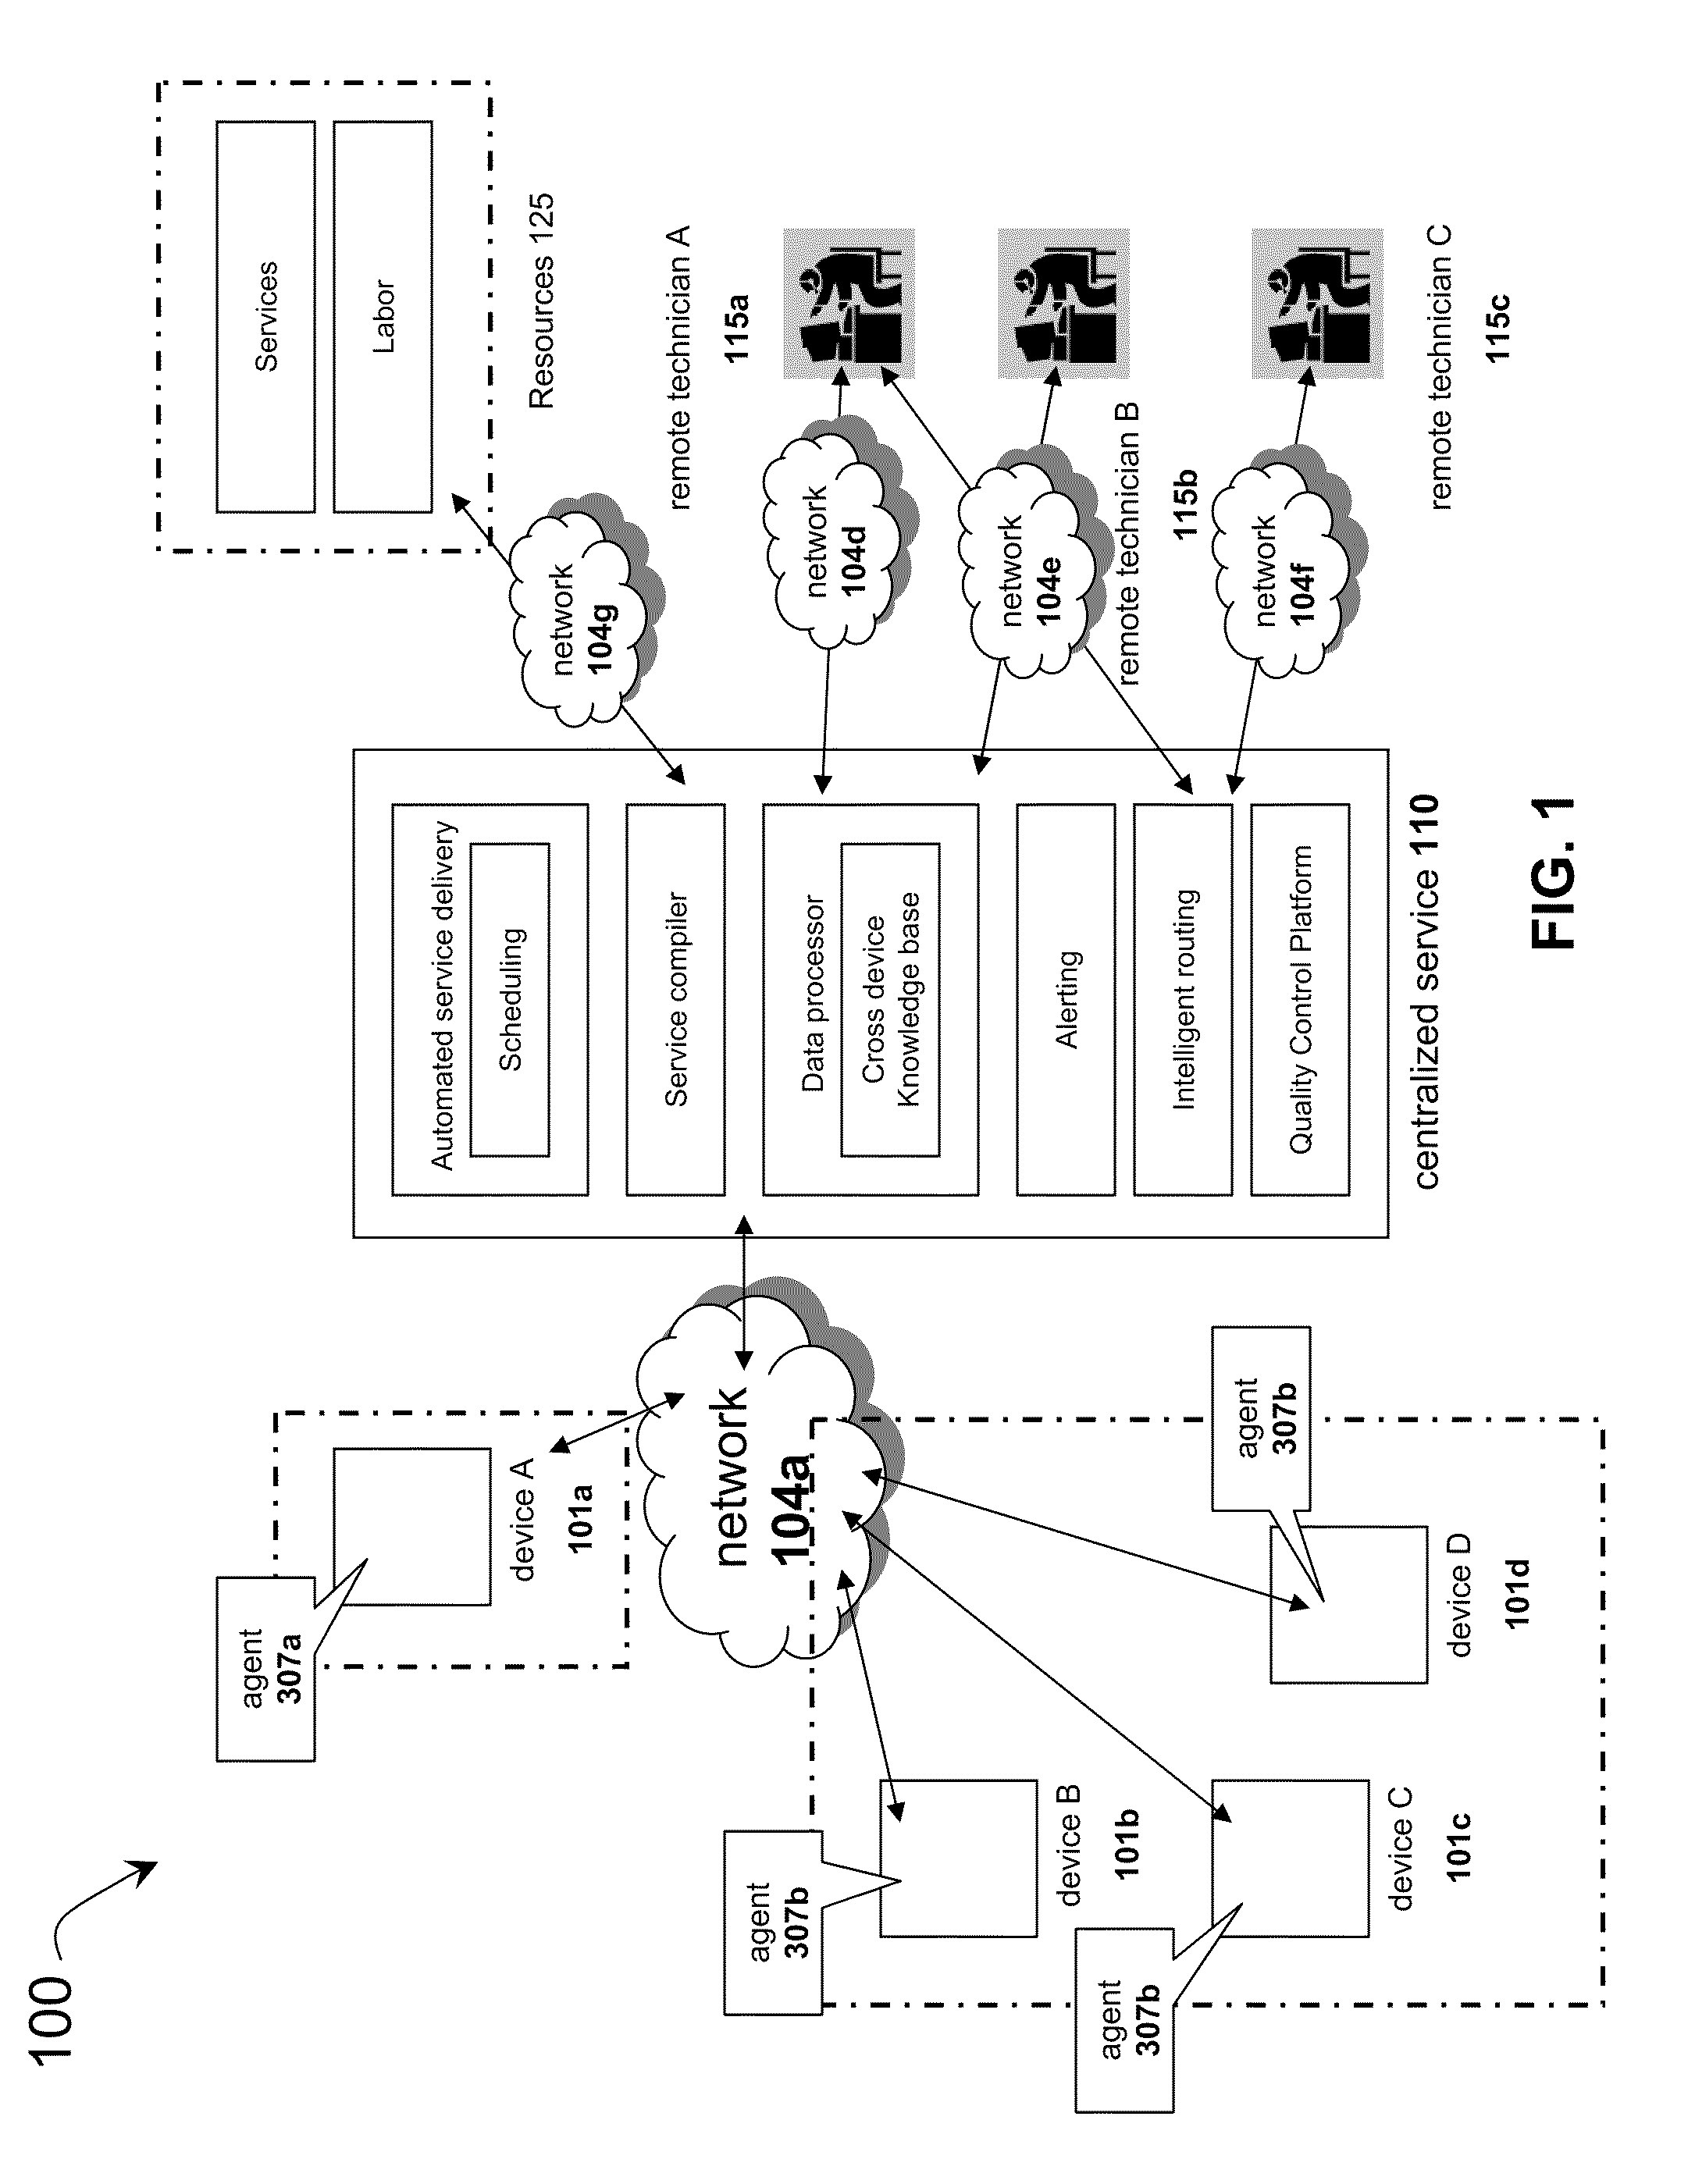 Systems and methods for providing remote services using a cross-device database